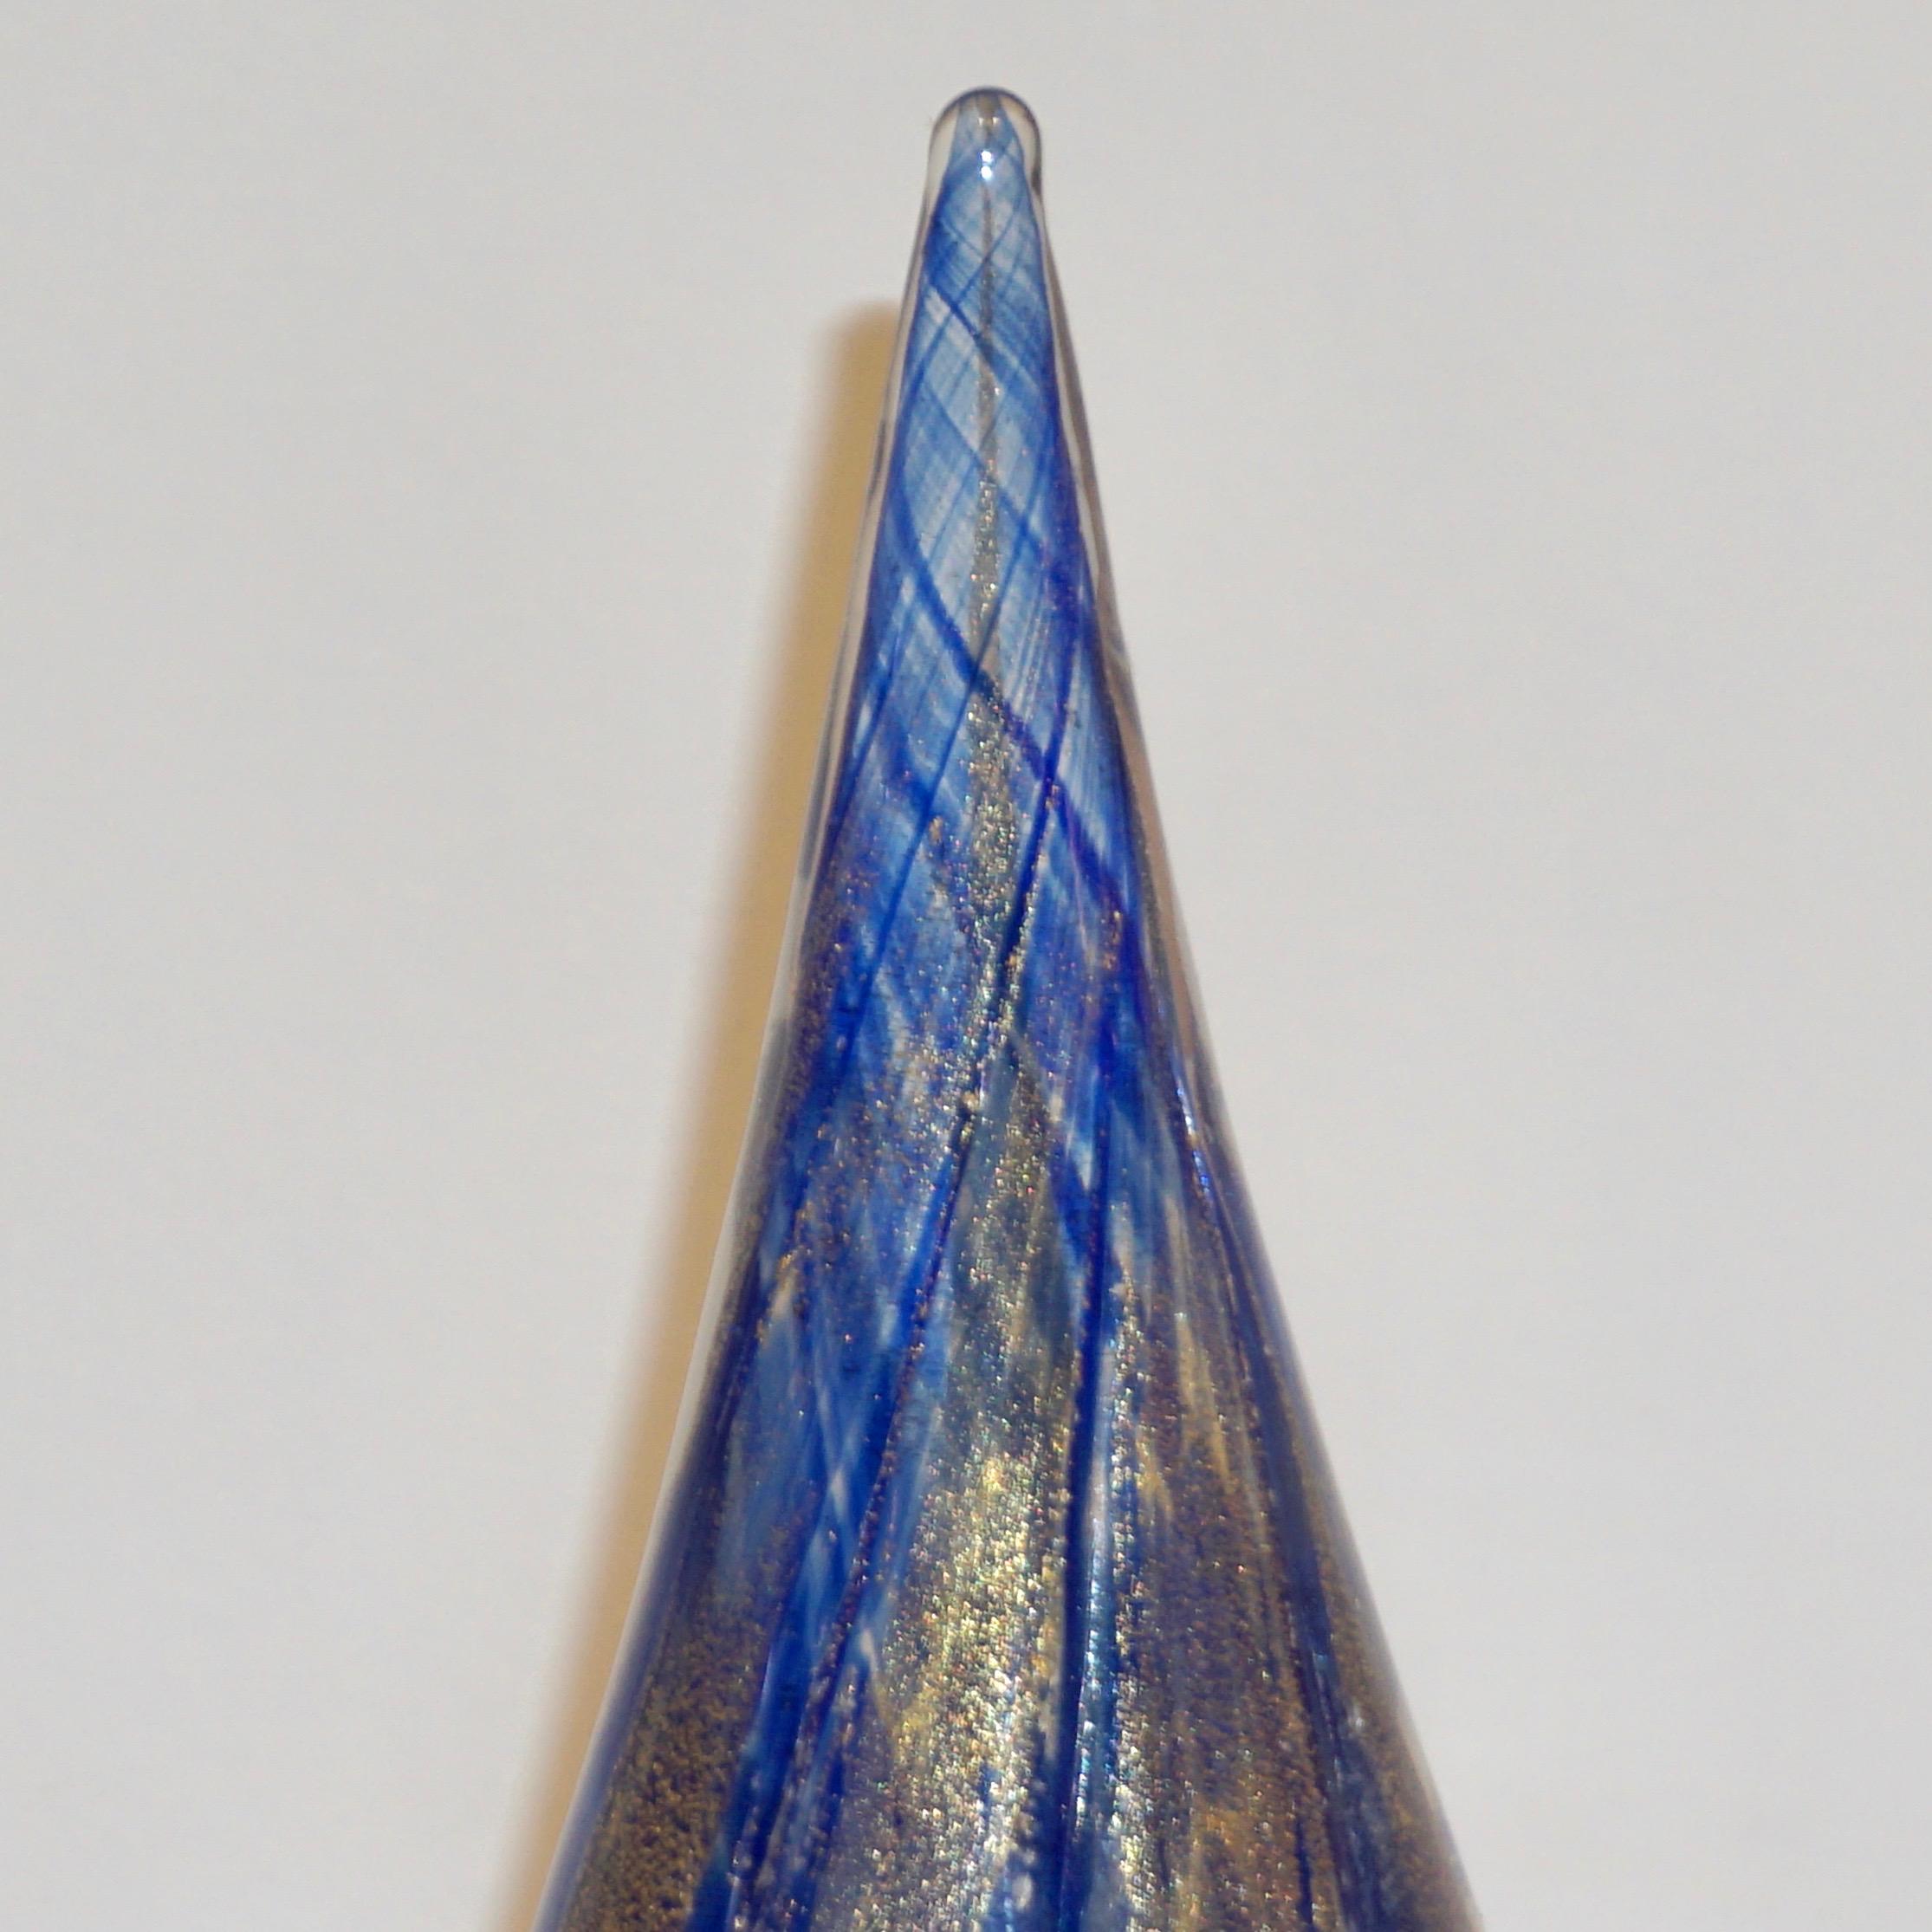 Hand-Crafted Formia 1980s Italian Vintage Royal Blue and Gold Murano Glass Tree Sculpture